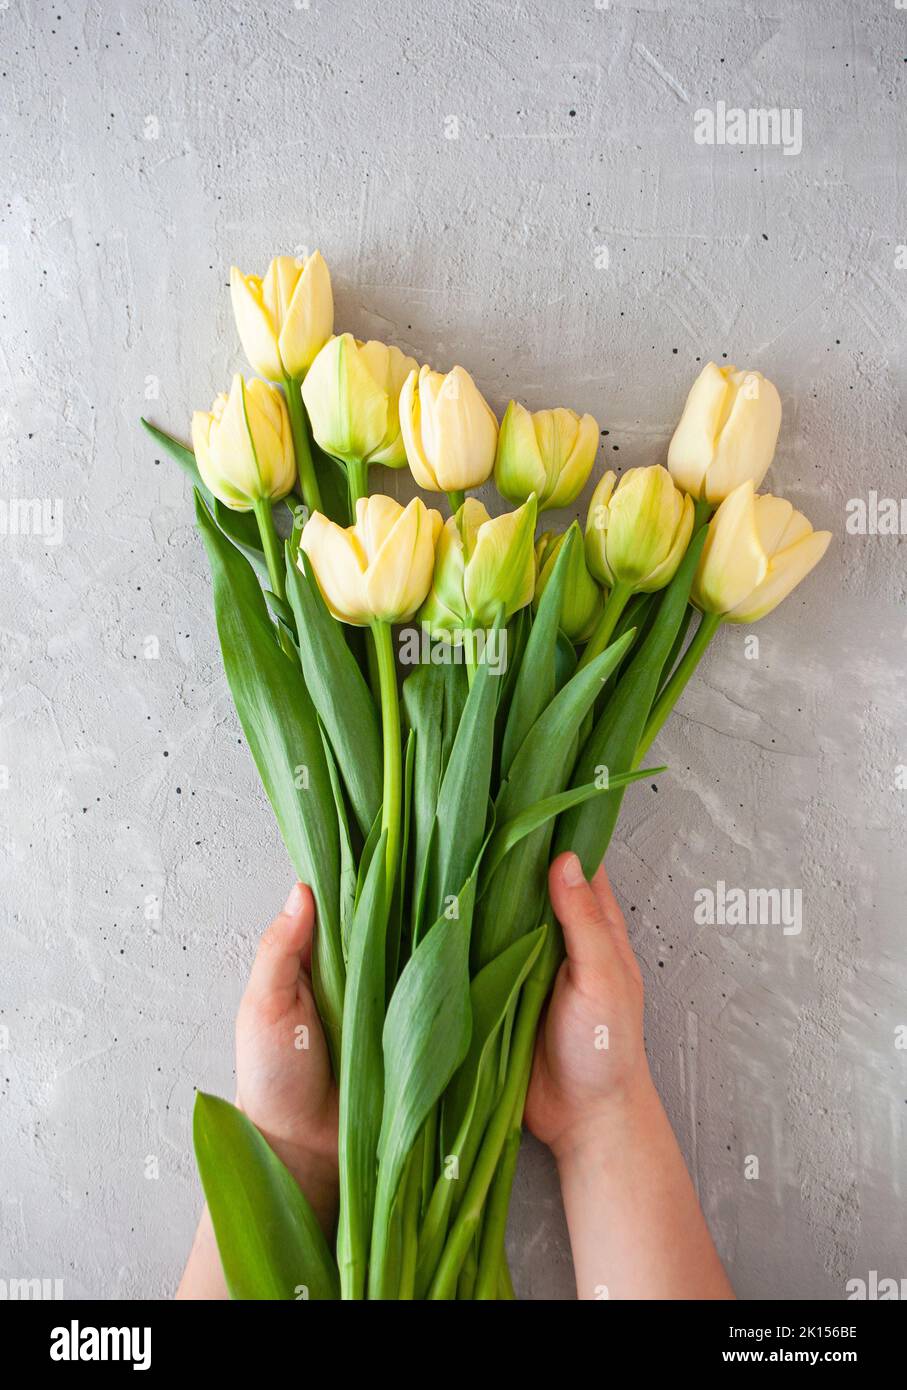 A yound lady arranging a bouquet of yellow tulips on a grey table. Stock Photo